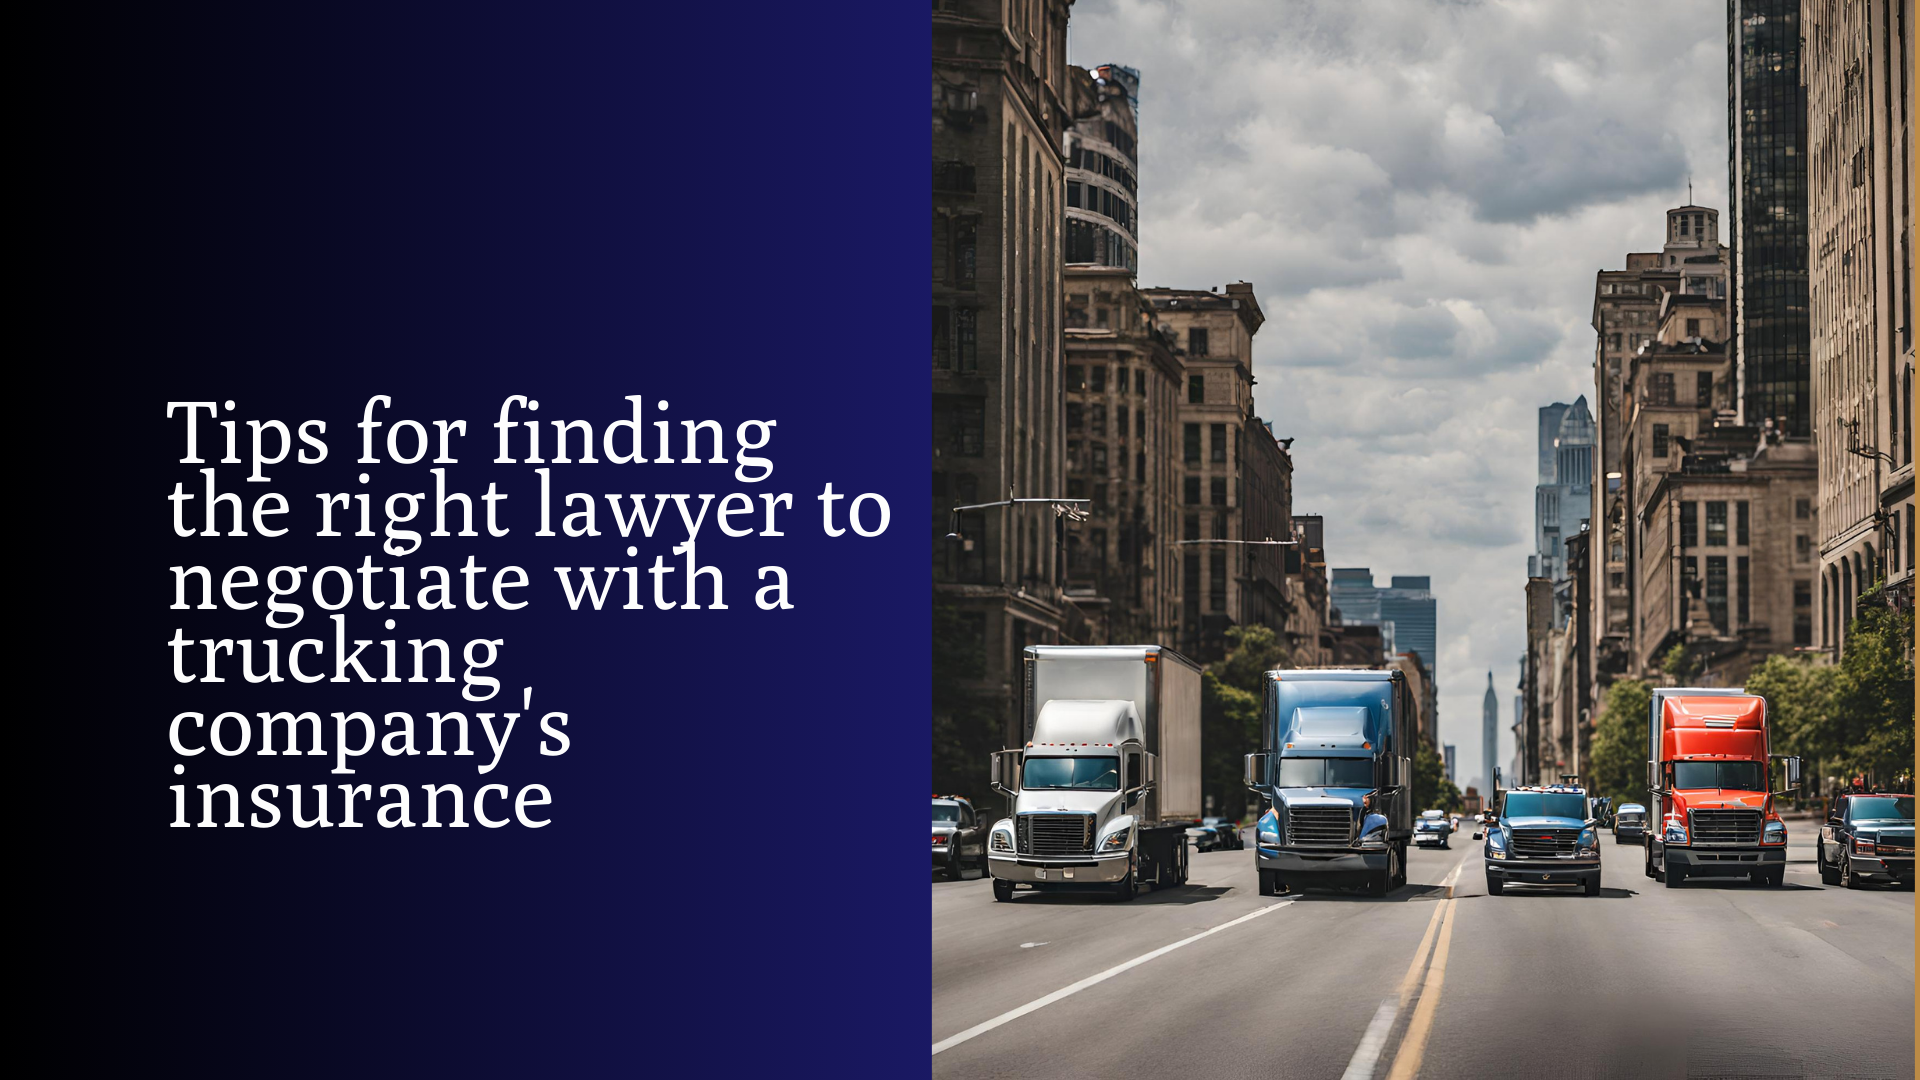 Tips for finding the right lawyer to negotiate with a trucking companys insurance